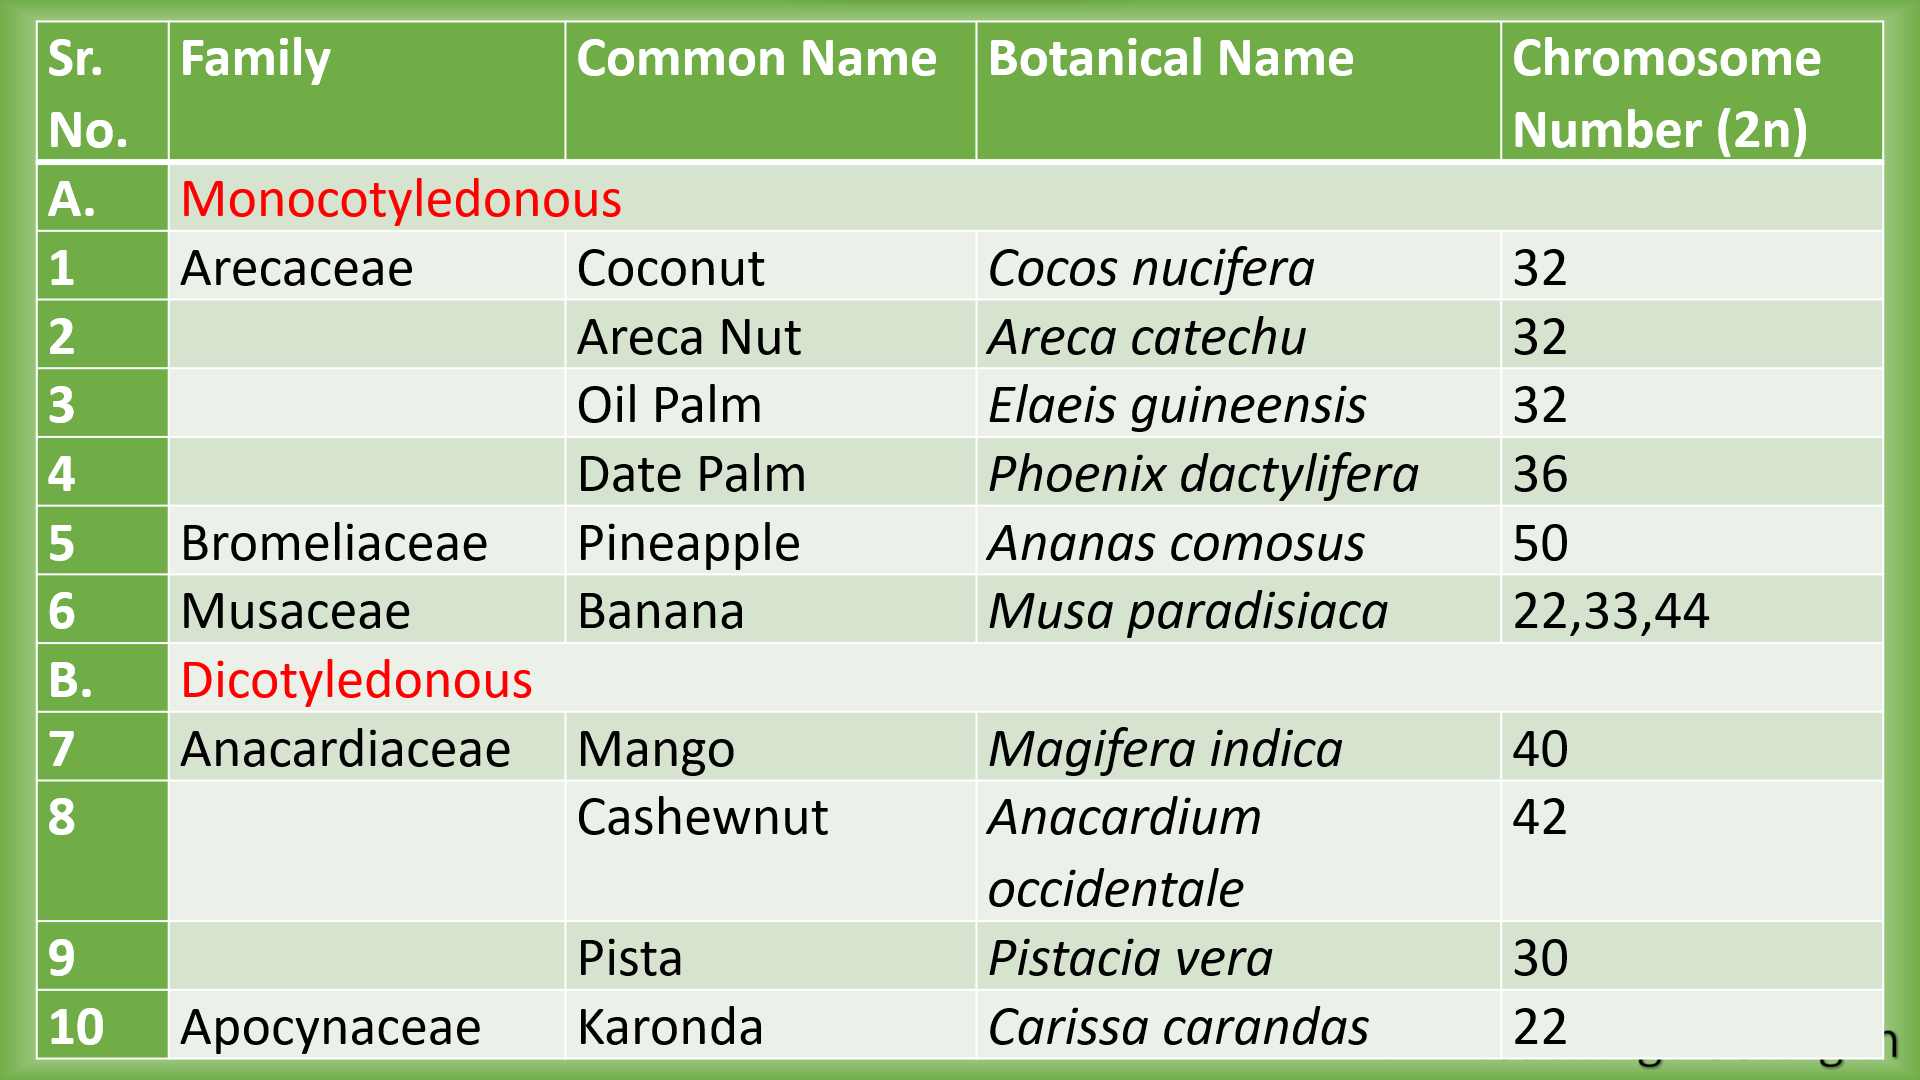 Horticultural and Botanical Classification of Fruits PPT